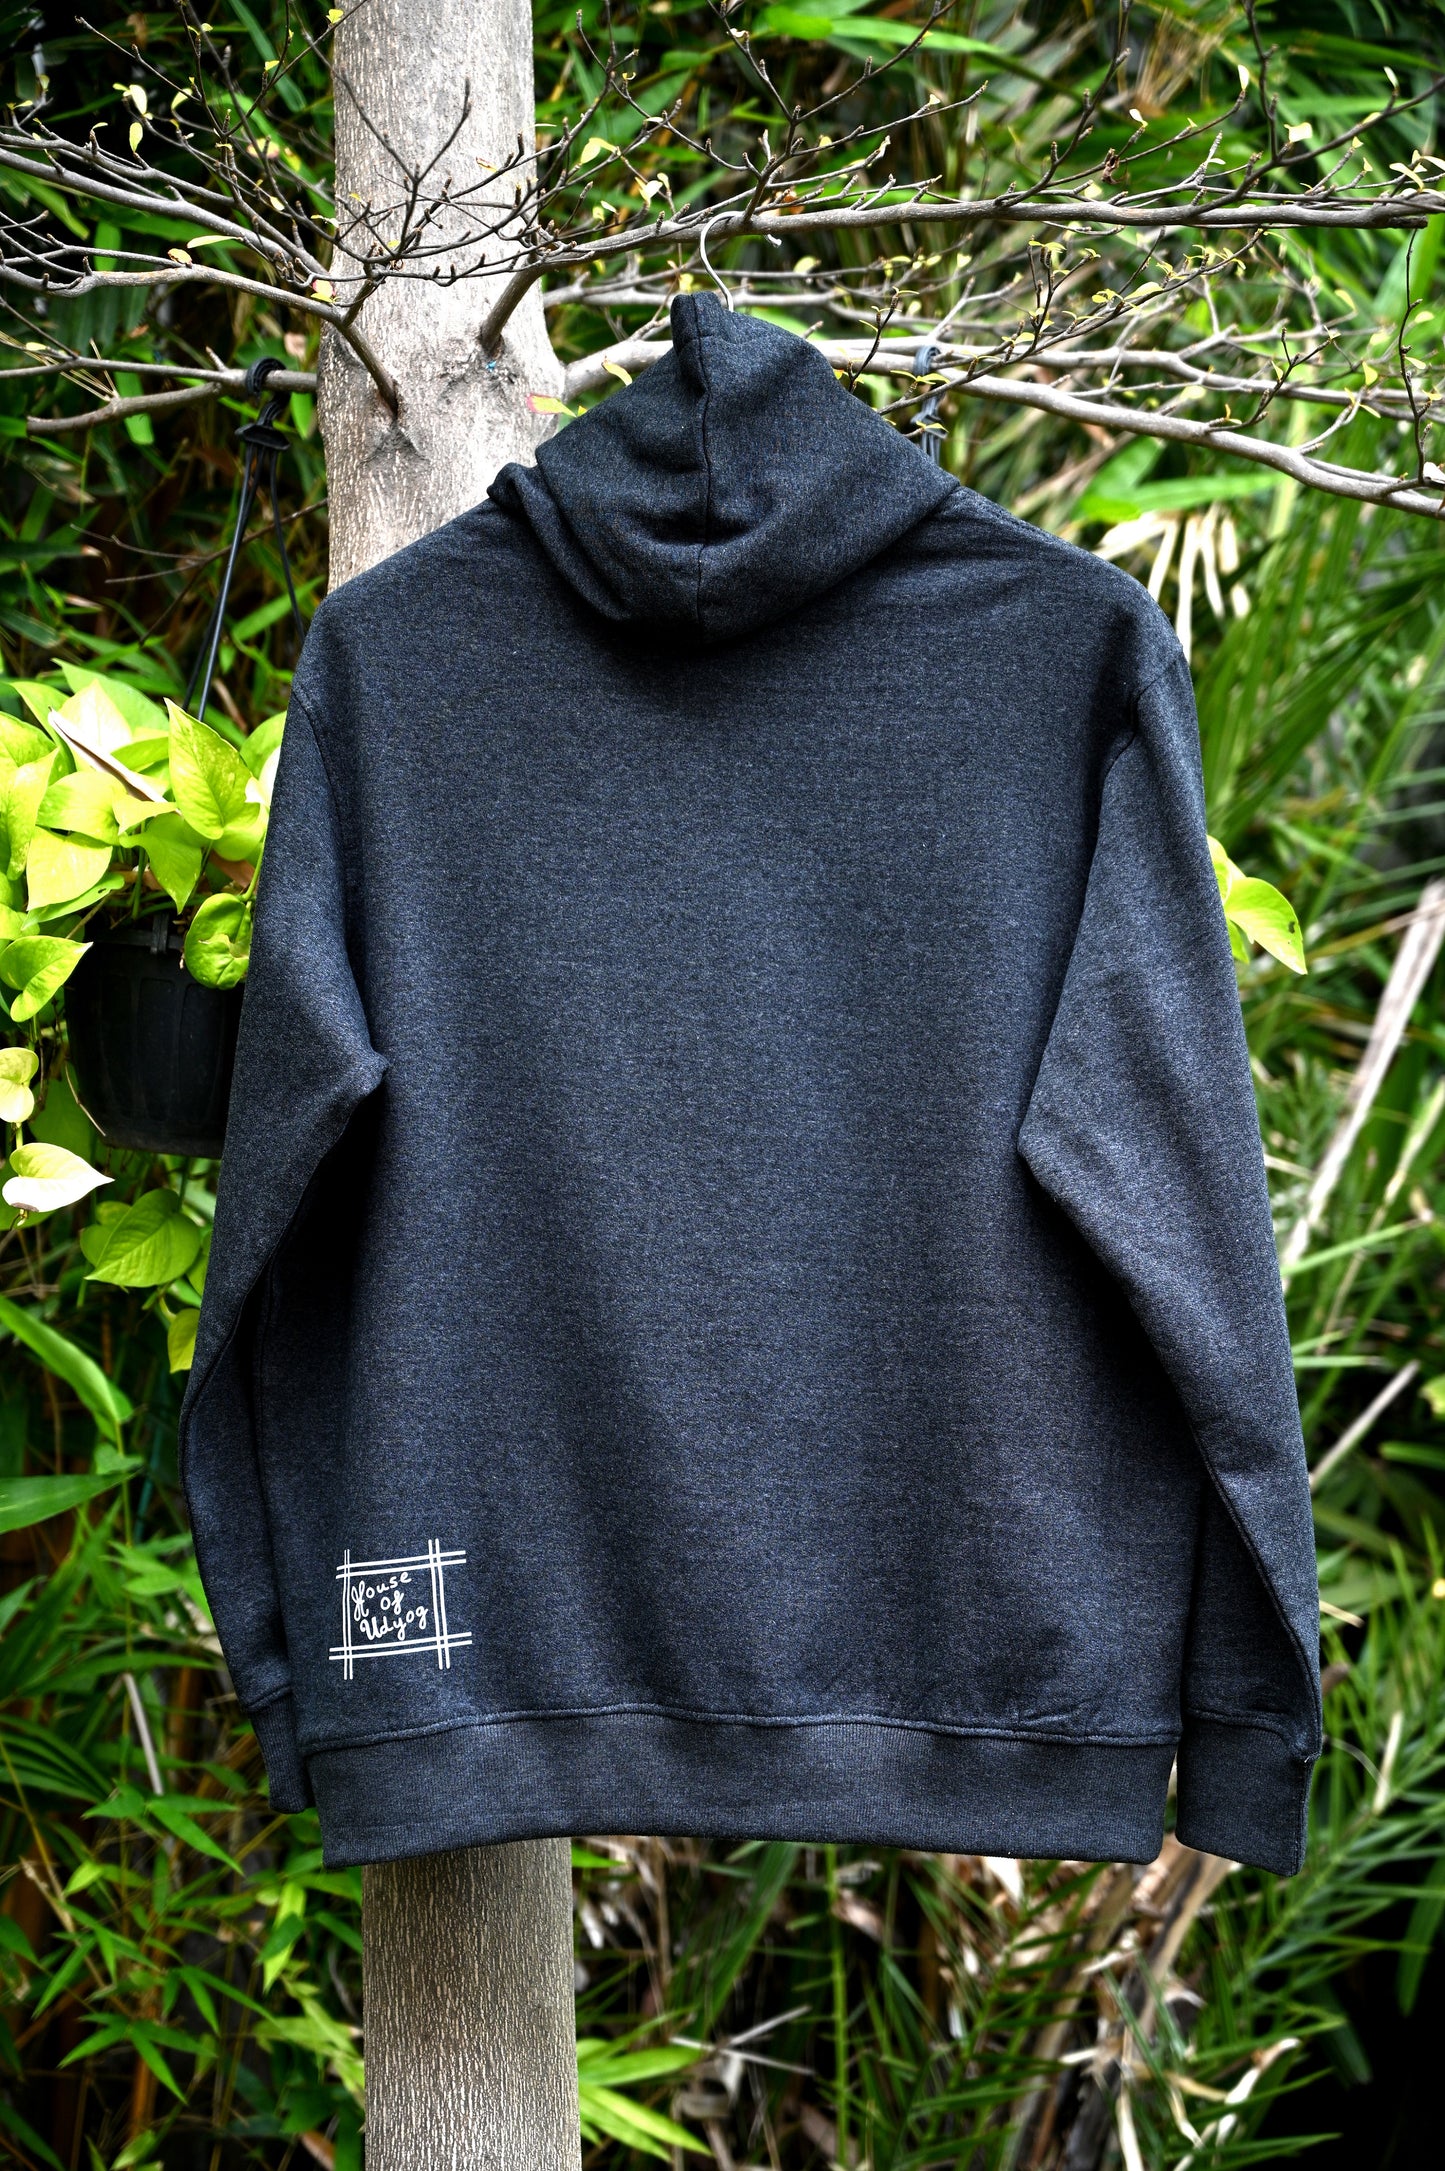 Charcoal grey hoodie with white print (unisex)